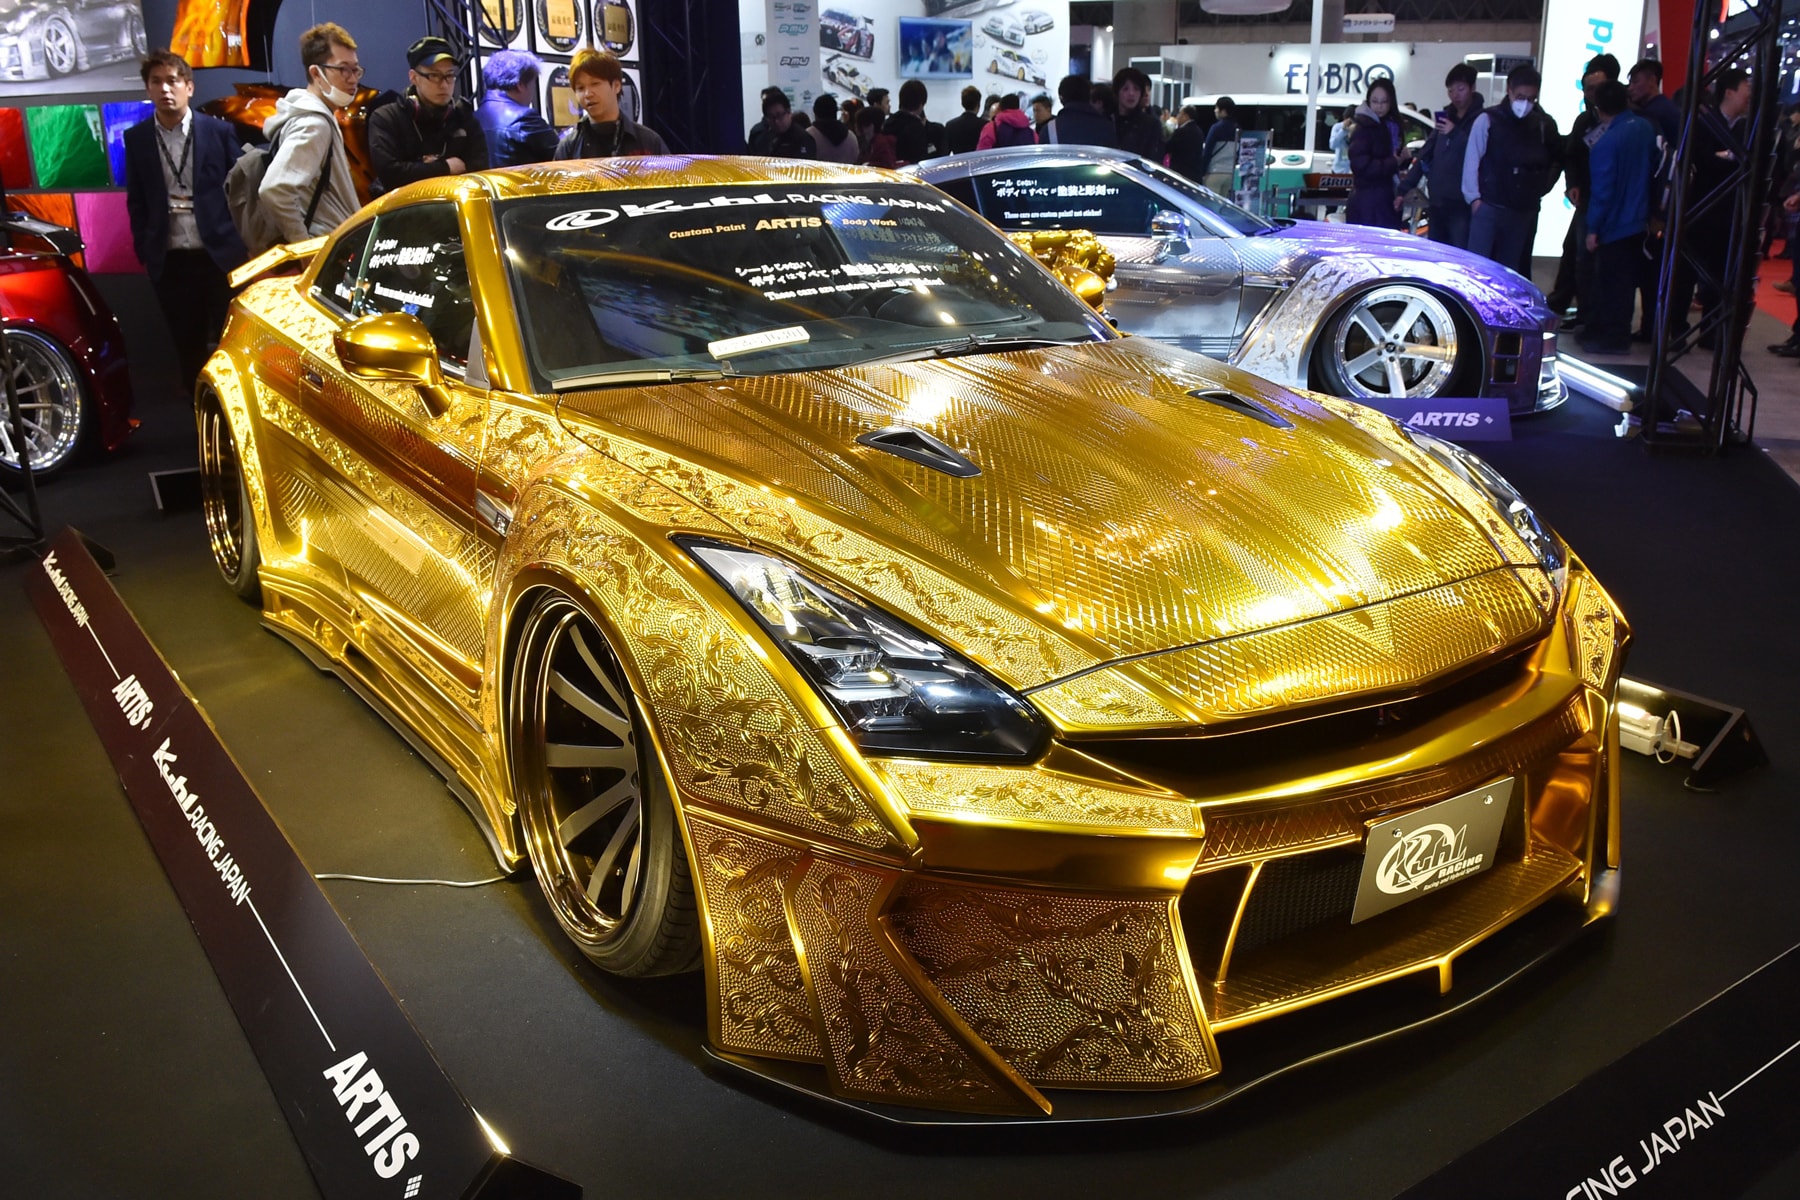 NISSAN GT-R  Kuhl Racing Golden chrome engraved body sale Kuhl Racing Golden Chrome Engraved NISSAN GT-R Sale Japan tuning cars supercars Dubai gold tuning modifications horsepower